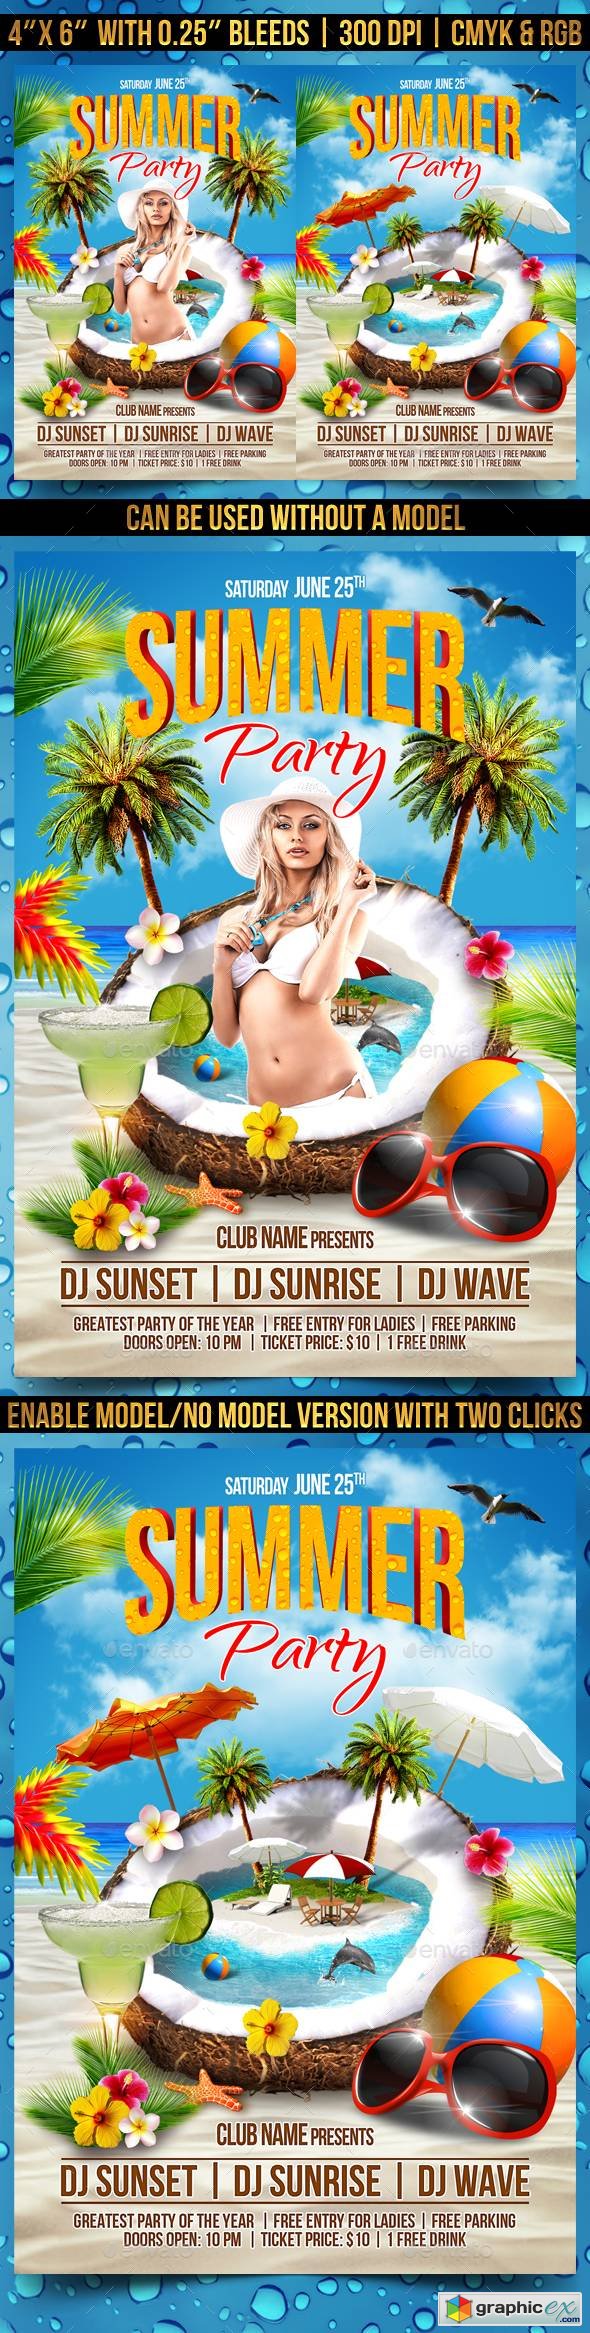 Summer Party Flyer Template 16348723